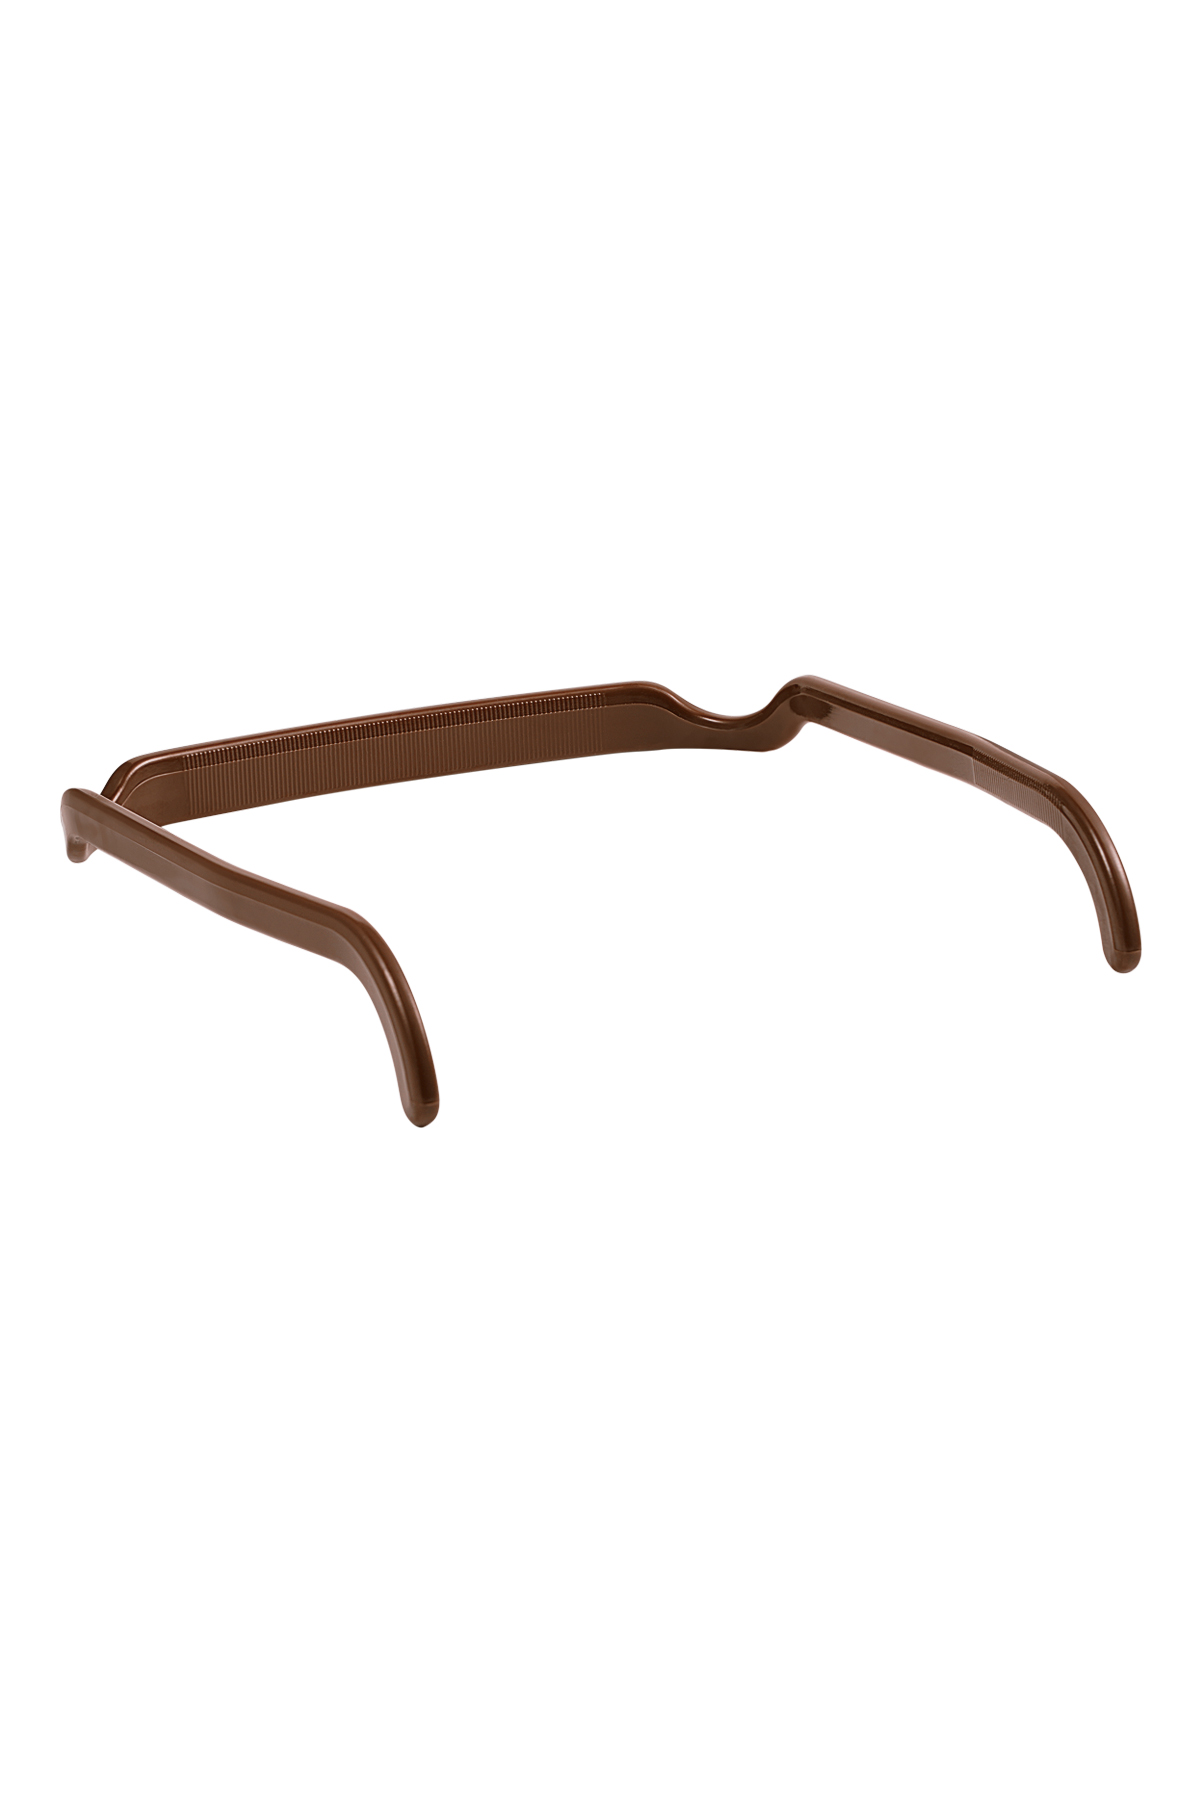 Square hairband - brown h5 Picture5